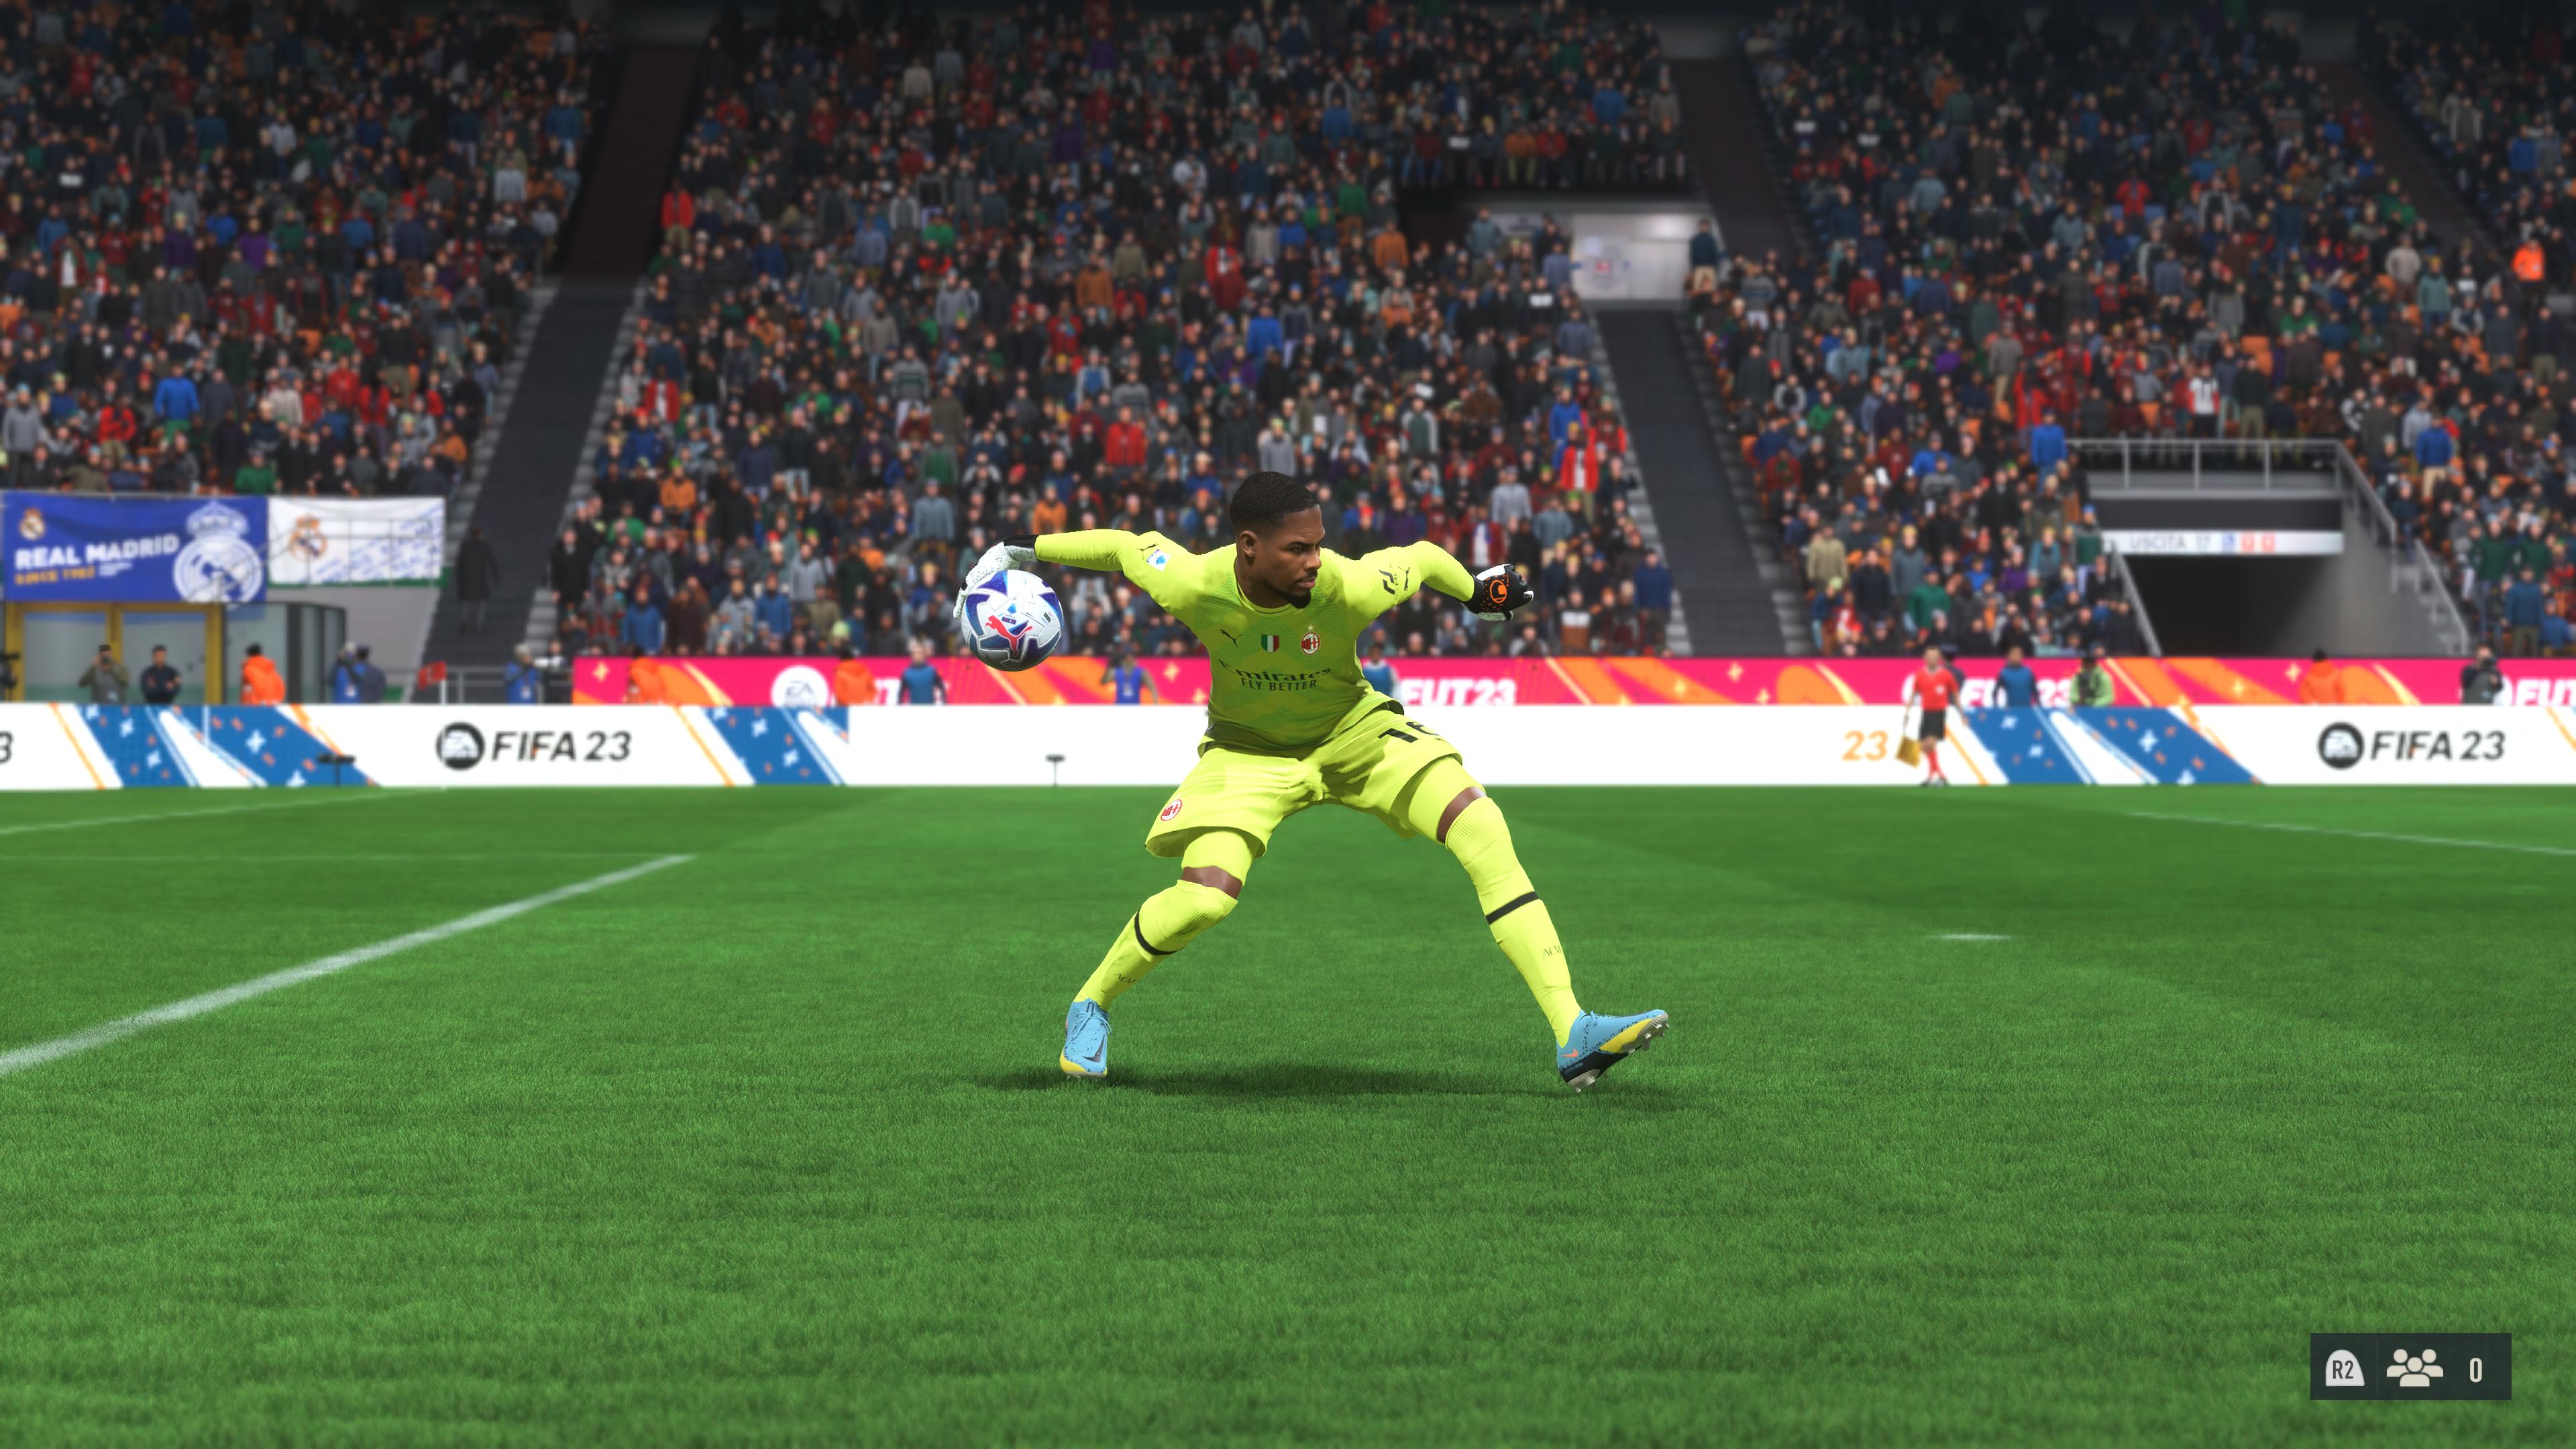 Mike Maignan, one of the best goalkeepers in FIFA 23, rolling the ball out to one of his defenders